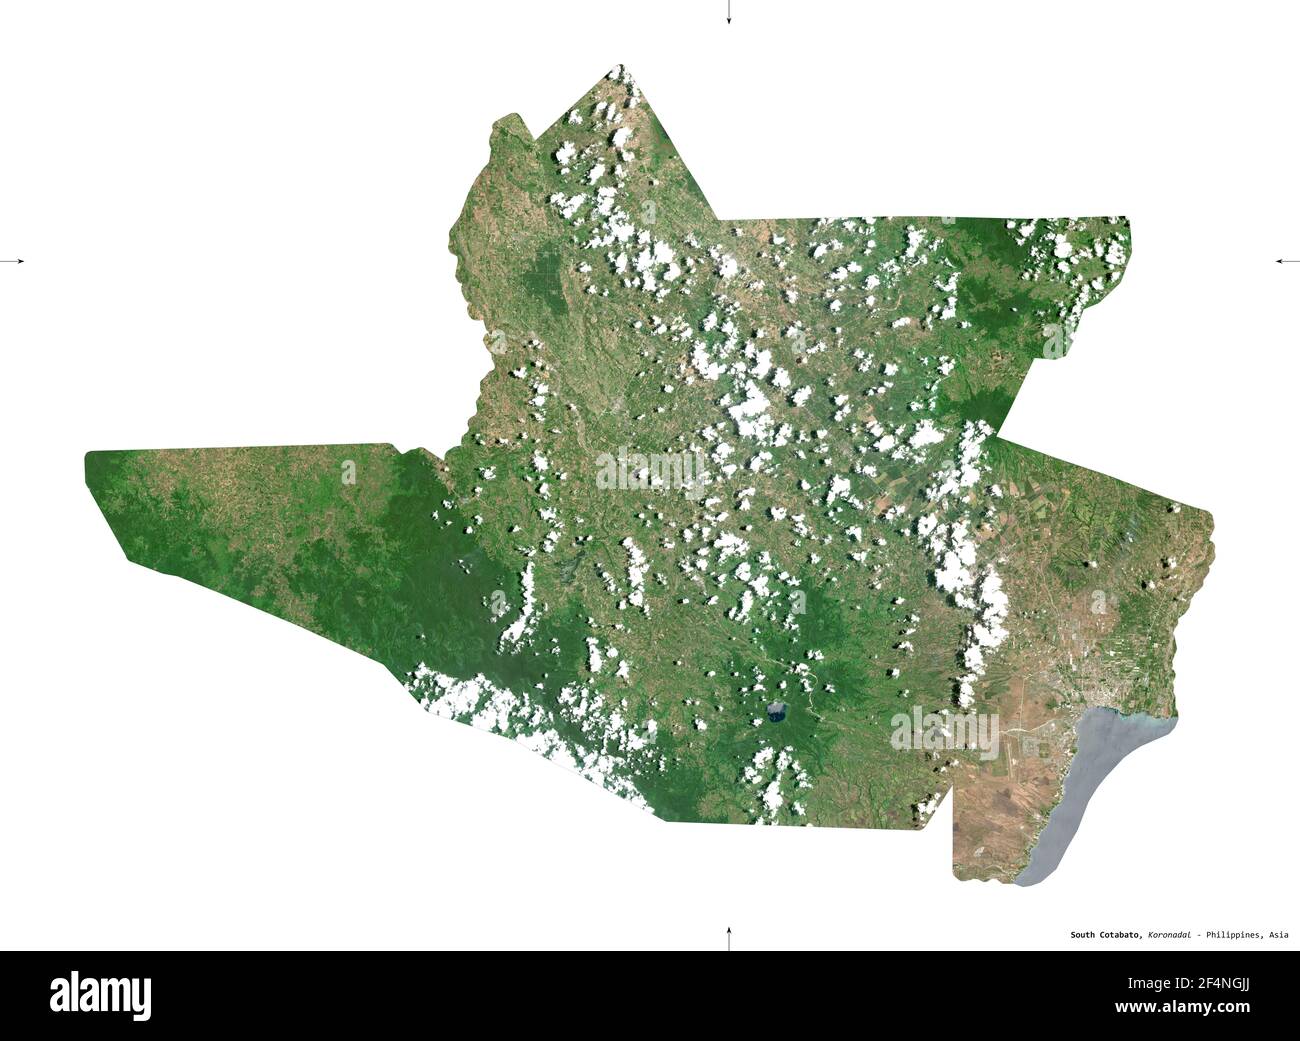 South Cotabato, province of Philippines. Sentinel-2 satellite imagery. Shape isolated on white solid. Description, location of the capital. Contains m Stock Photo